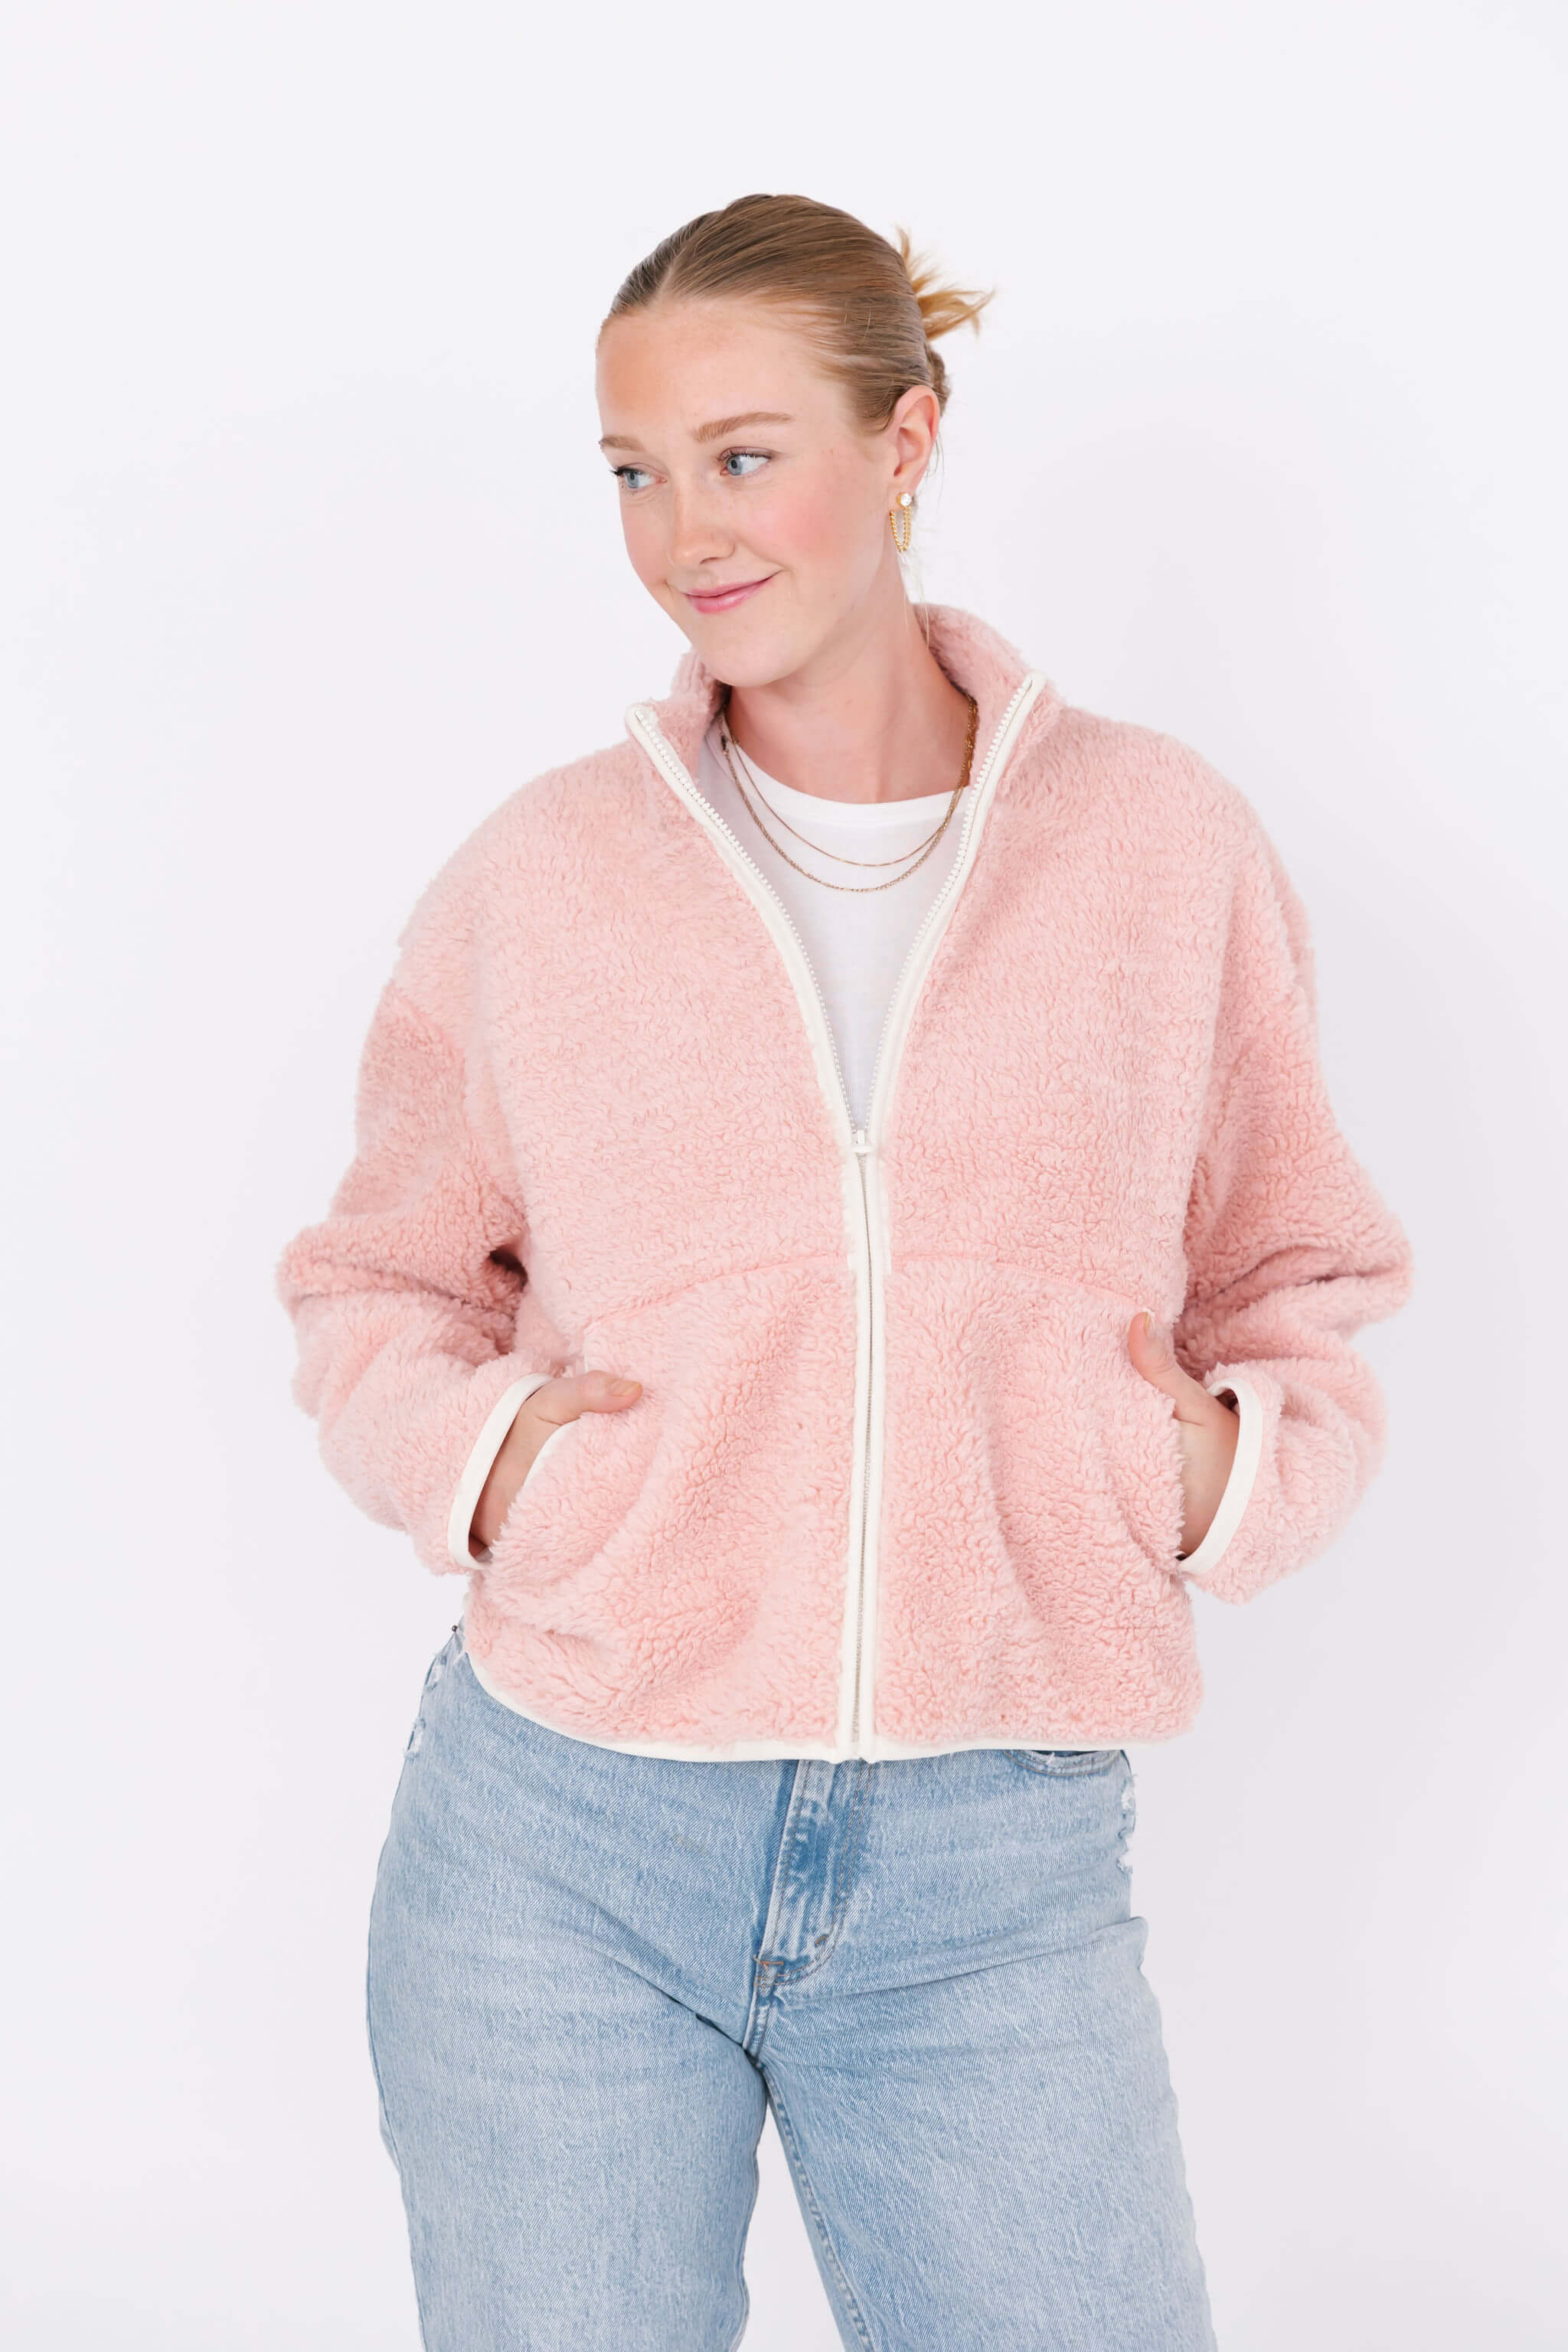 Smash + Tess and Kaitlyn Bristowe Toasty Teddy Zip Up in Rosé Pink